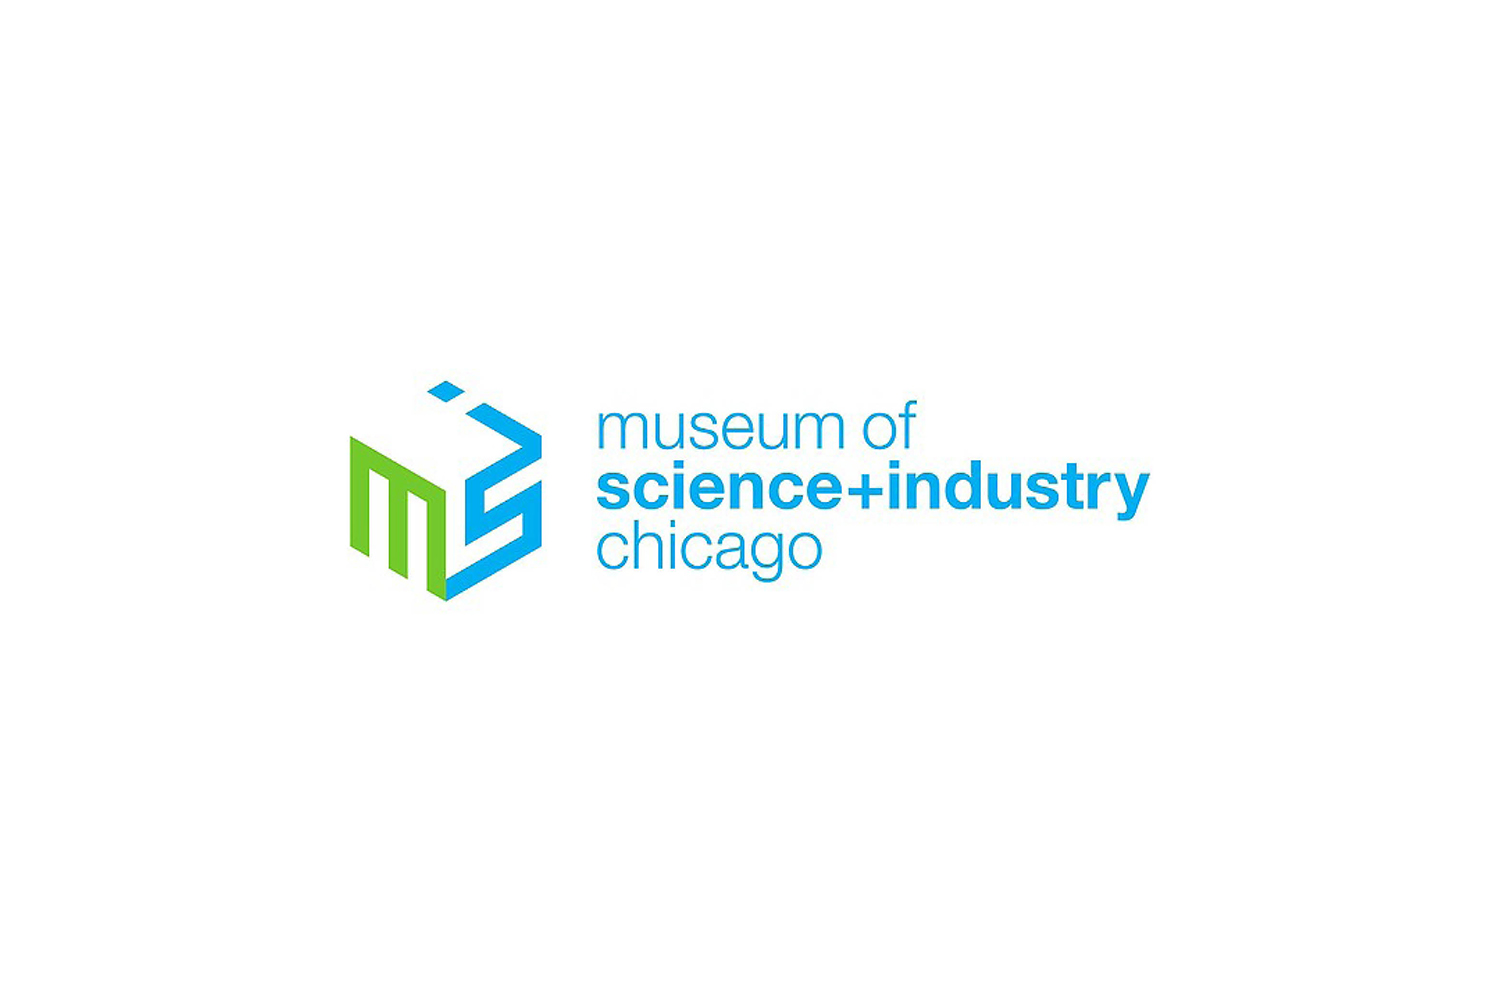 Boss_Display_Client_MSI_Museum_of_Science+Industry_Chicago_Logo.jpg